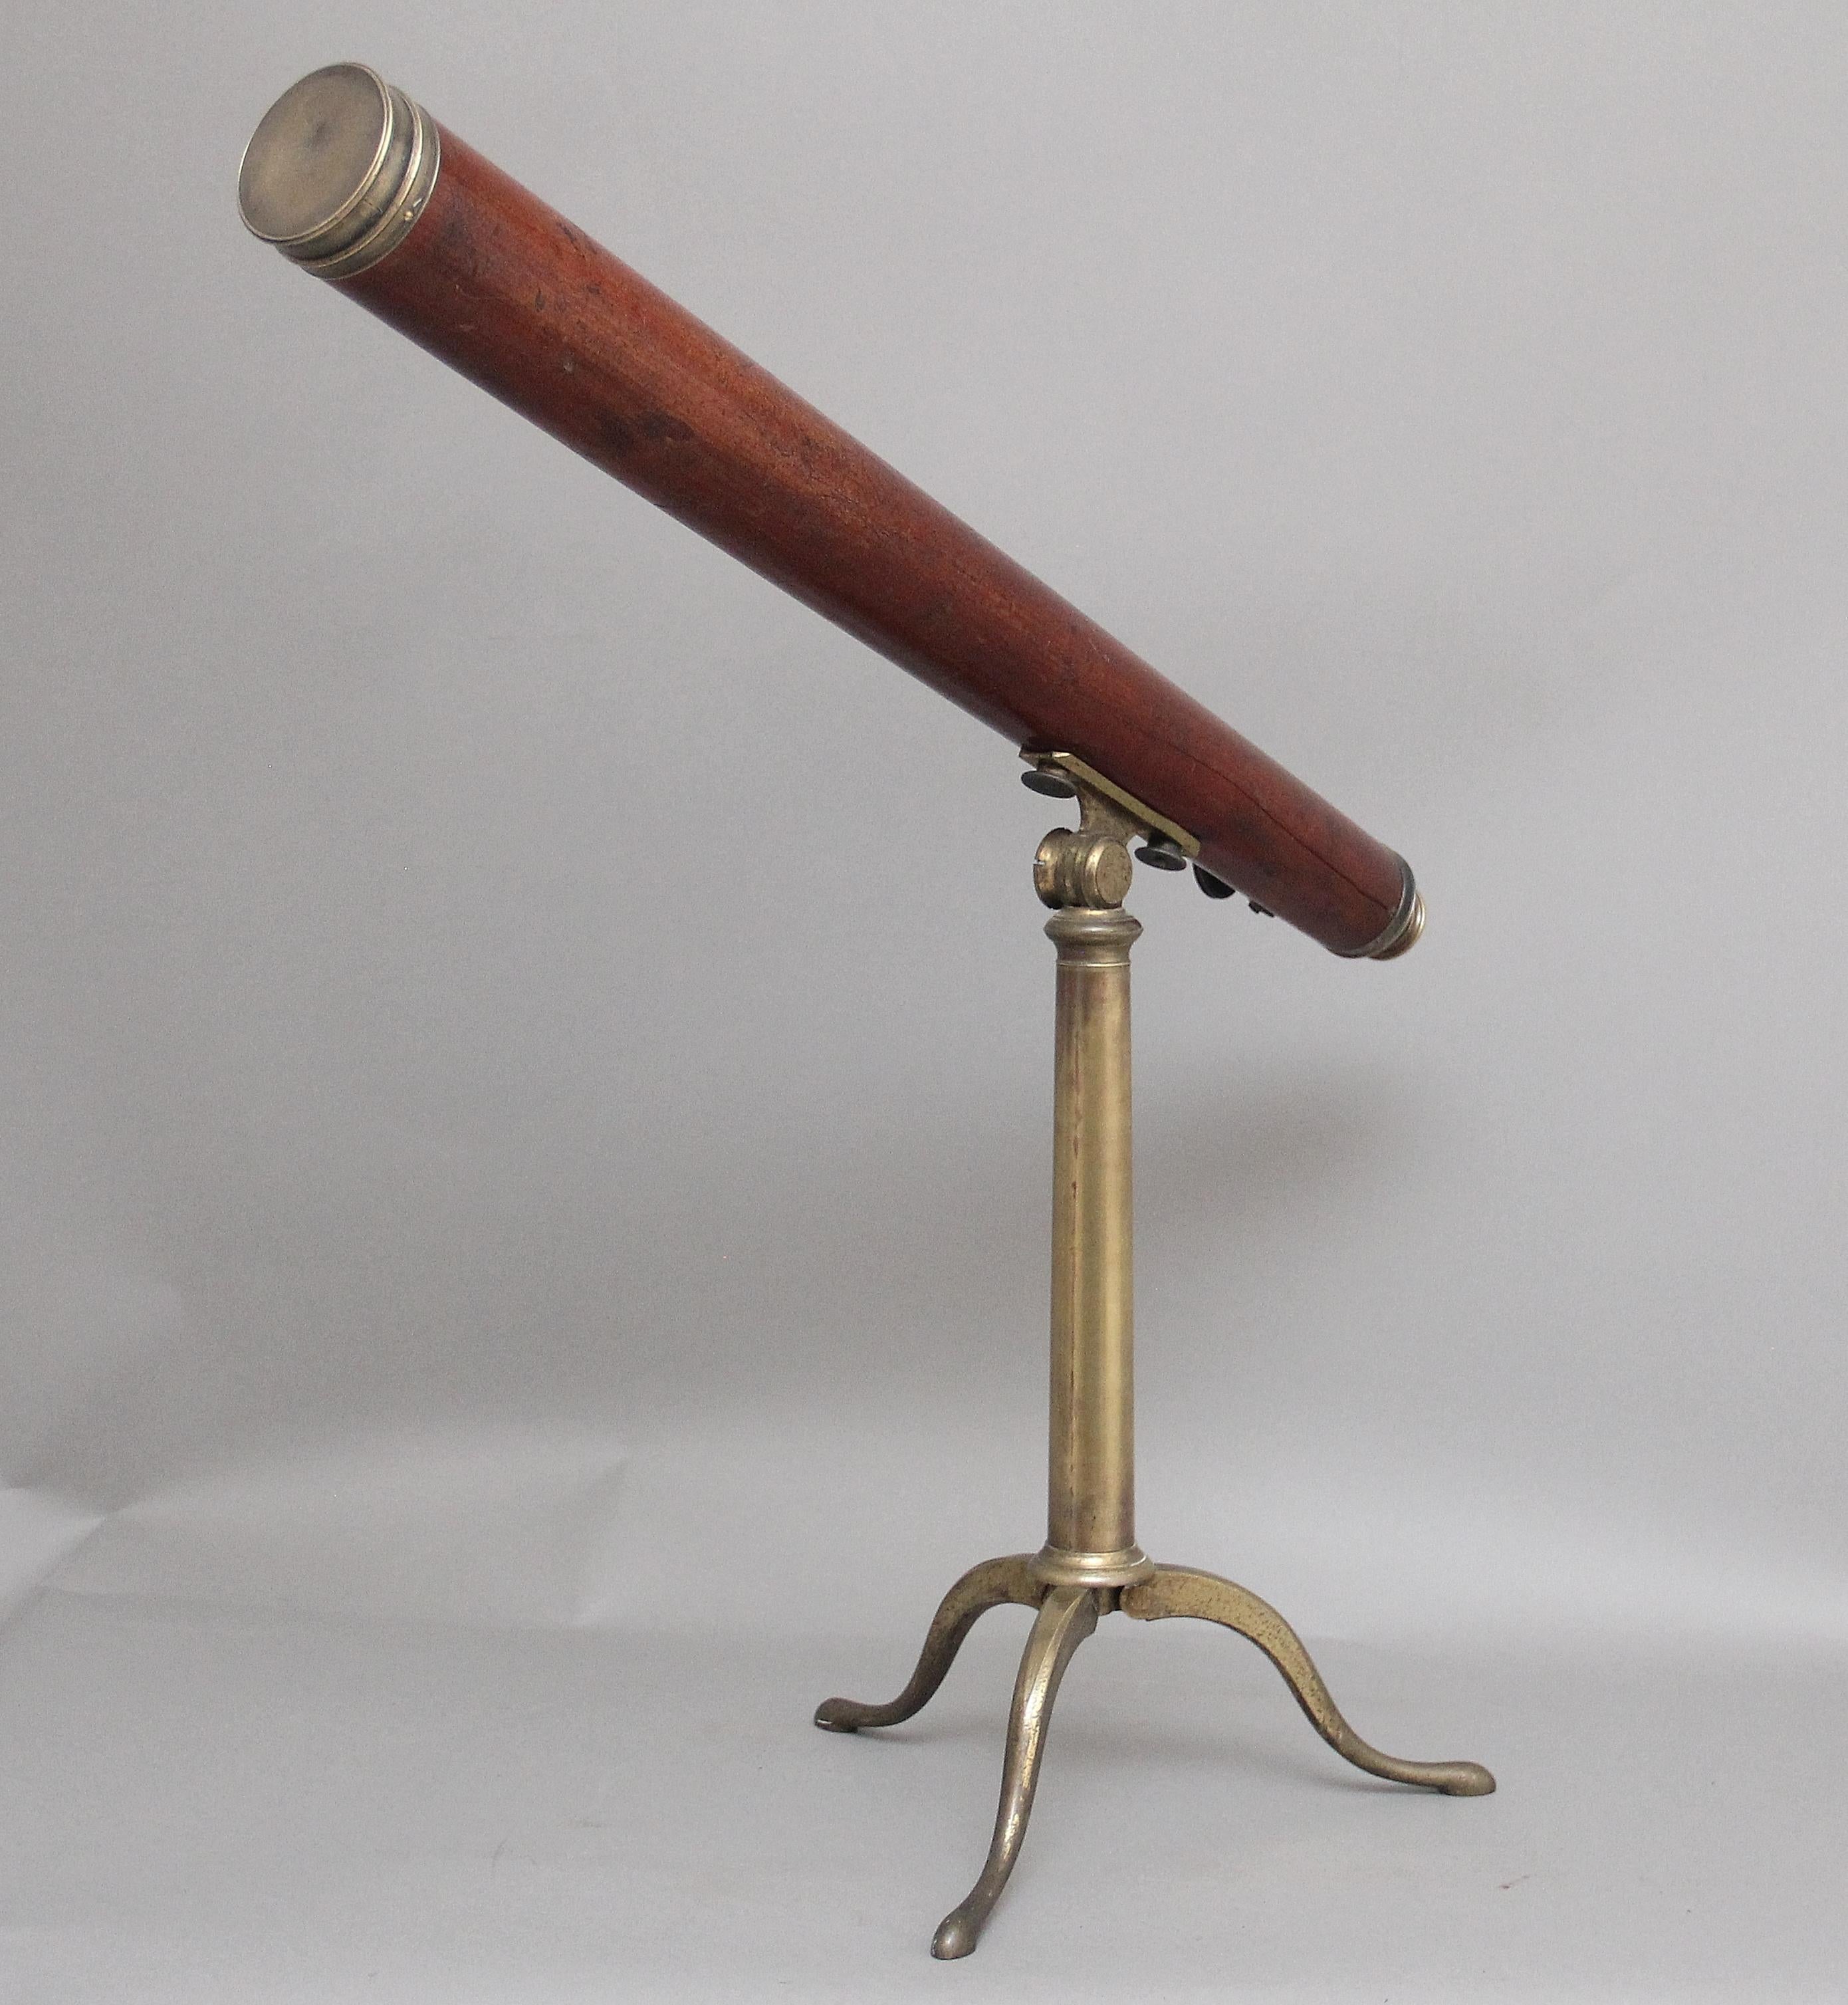 18th Century mahogany and brass telescope by Nairne & Blunt of London, having a mahogany barrel with a thumb wheel to the side of the main barrel, supported on a solid brass tripod stand with cabriole legs, the mount allows the mahogany barrel to